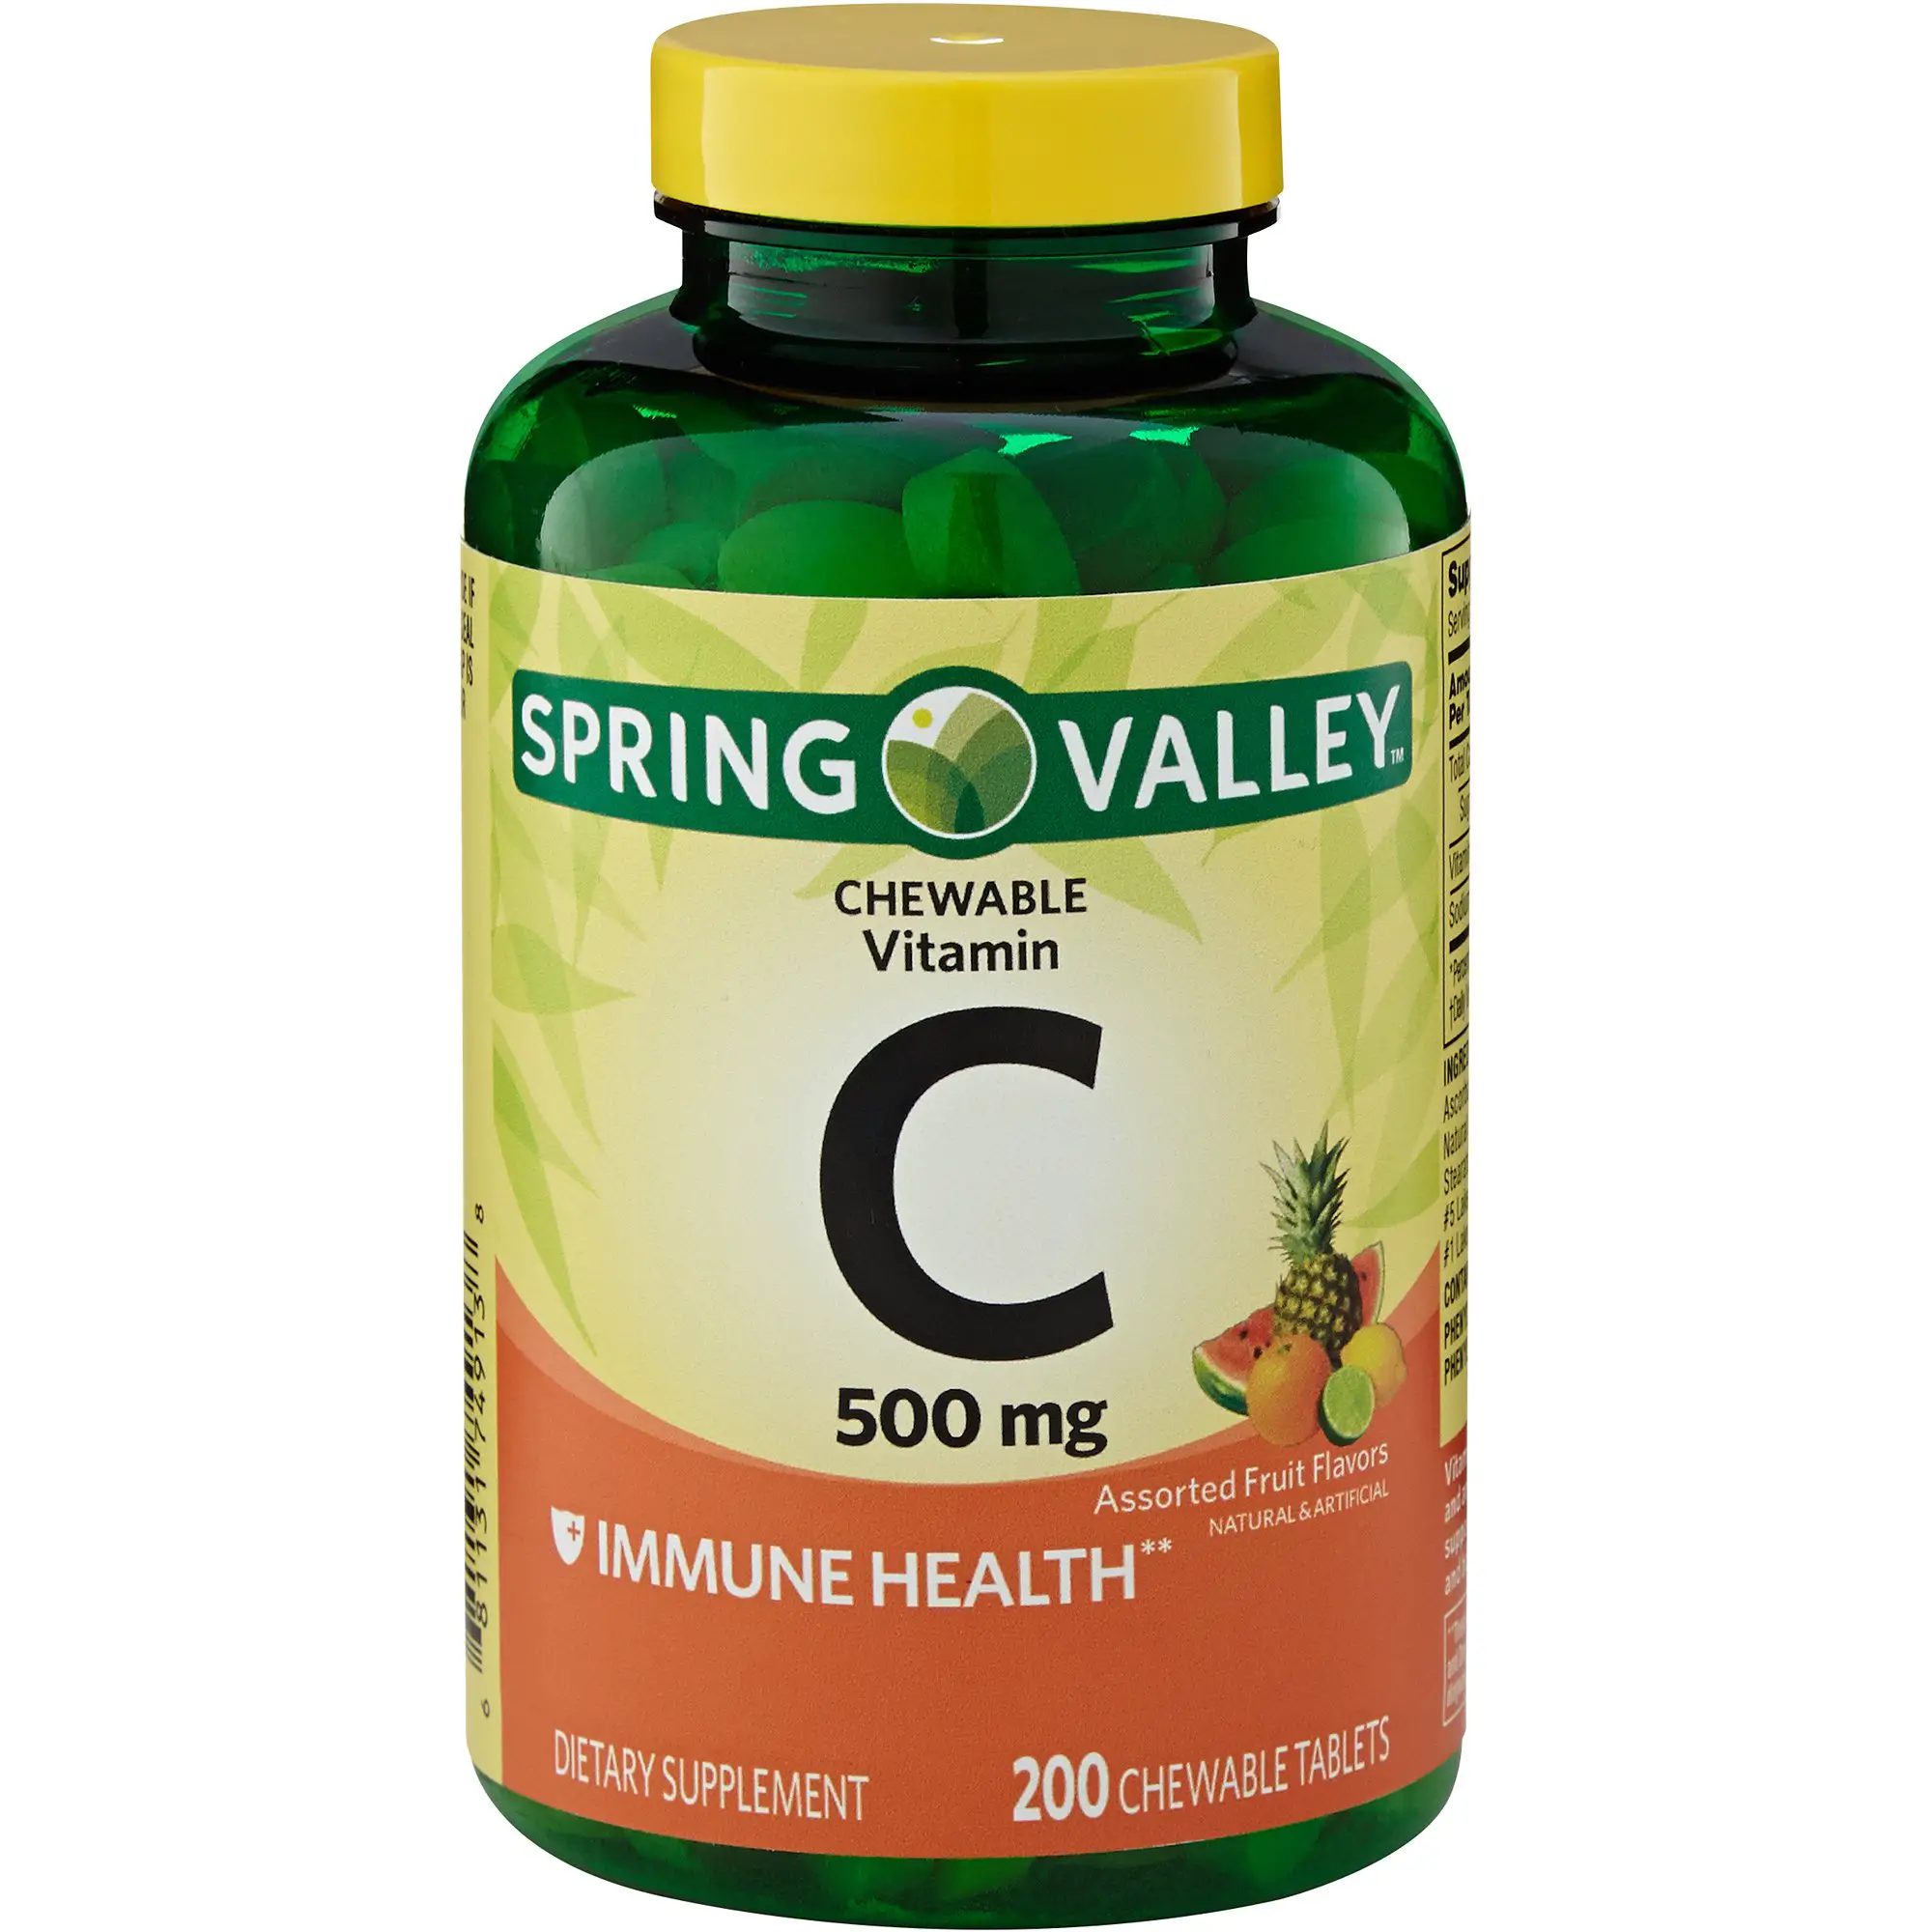 where-to-buy-spring-valley-vitamins-vitaminproguide